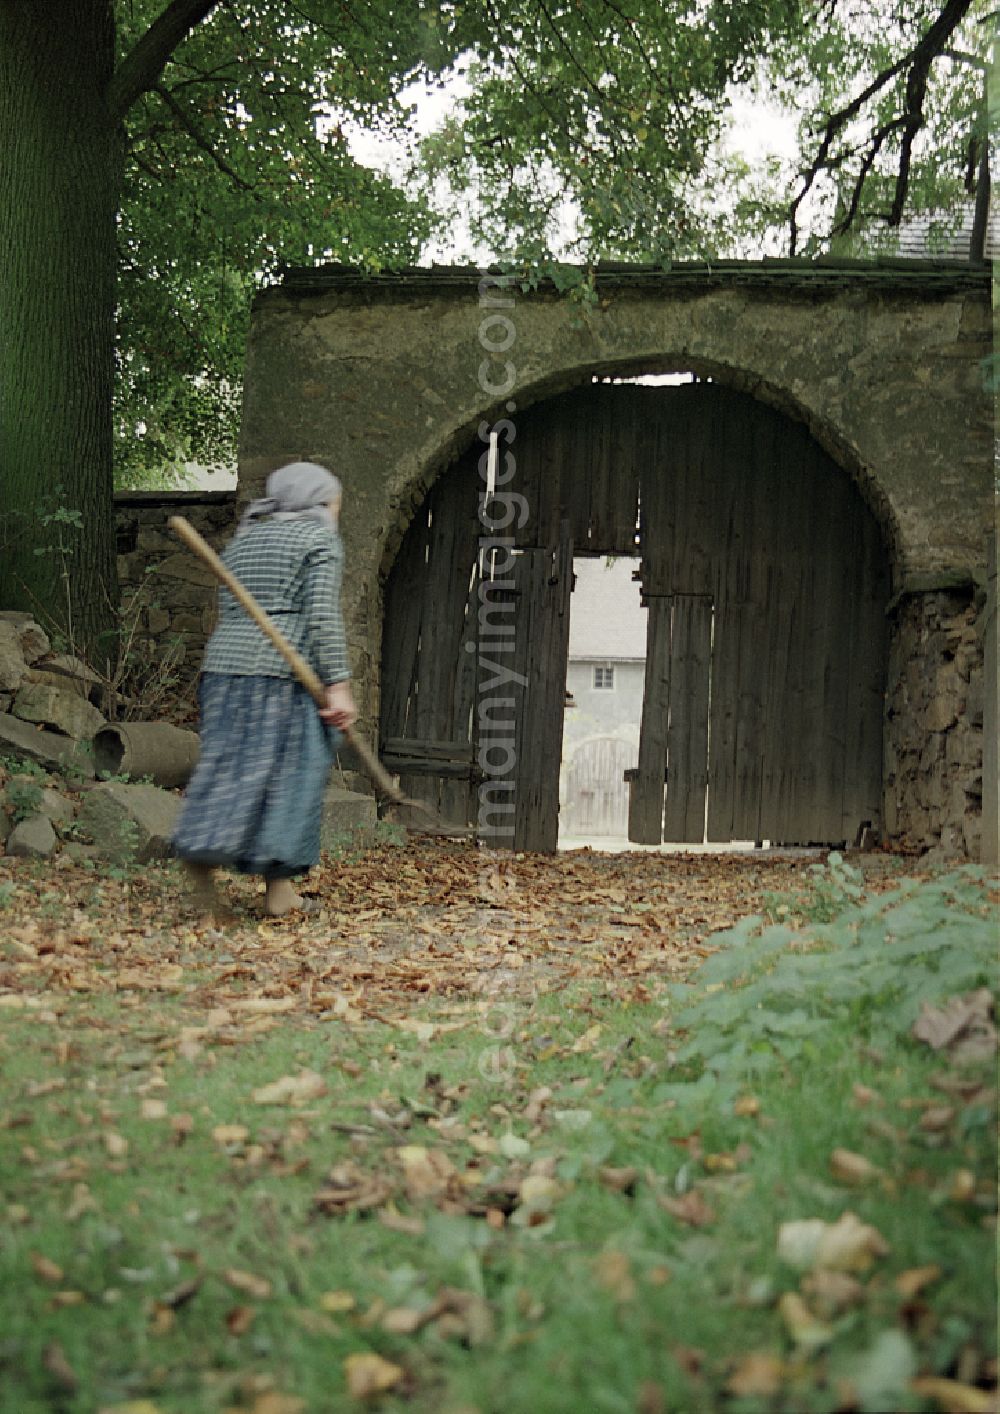 GDR photo archive: Räckelwitz - Agricultural work in a farm and farm in Raeckelwitz, Saxony on the territory of the former GDR, German Democratic Republic